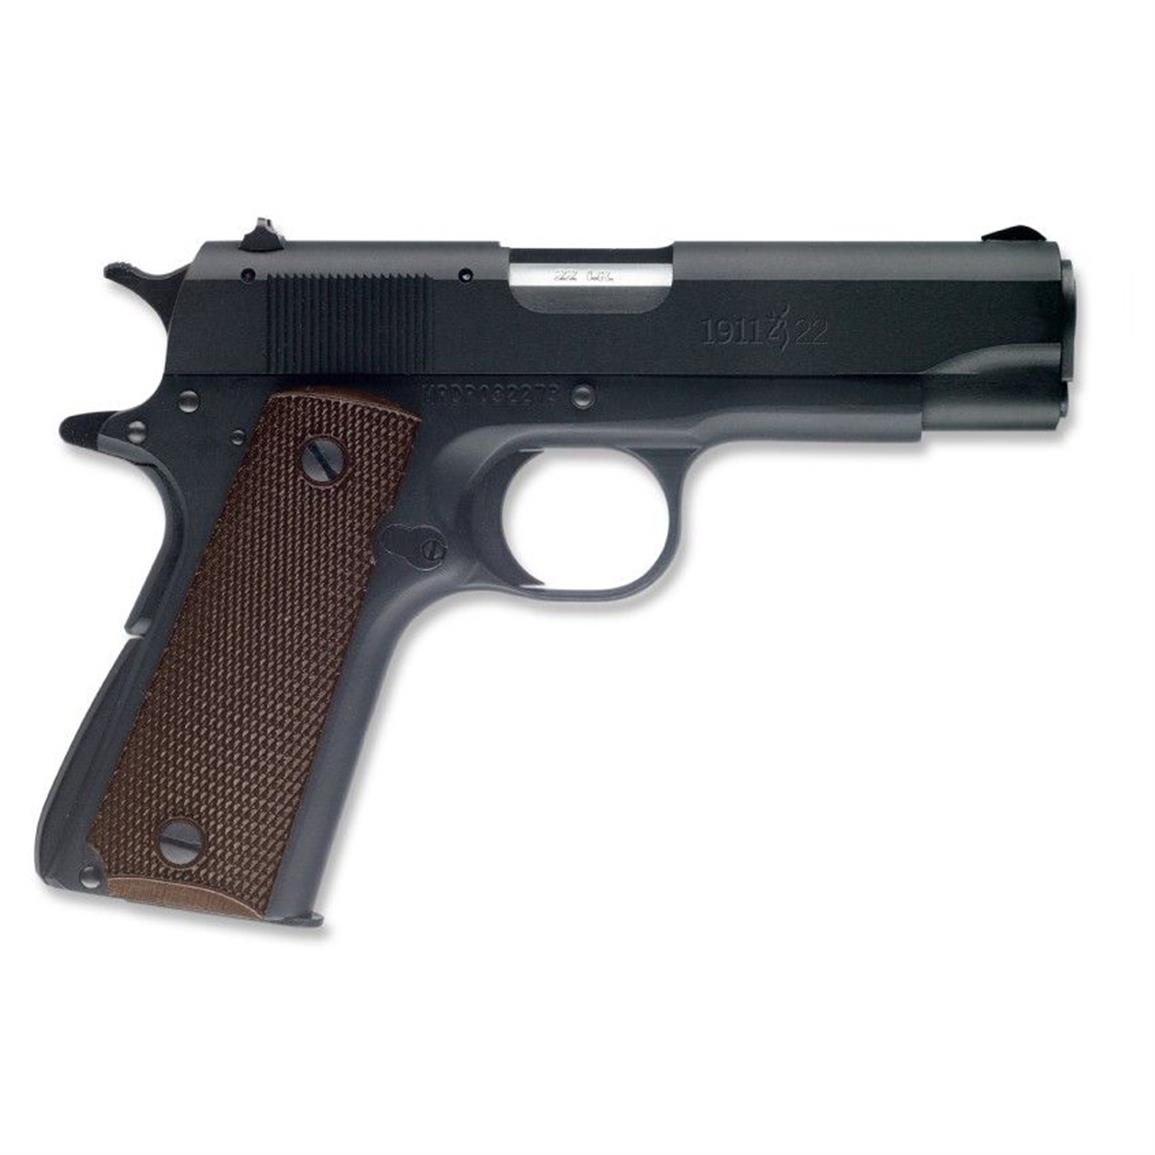 Browning 1911-22 Compact, Semi-automatic, .22LR, Rimfire, 3.625" Barrel, 10+1 Rounds